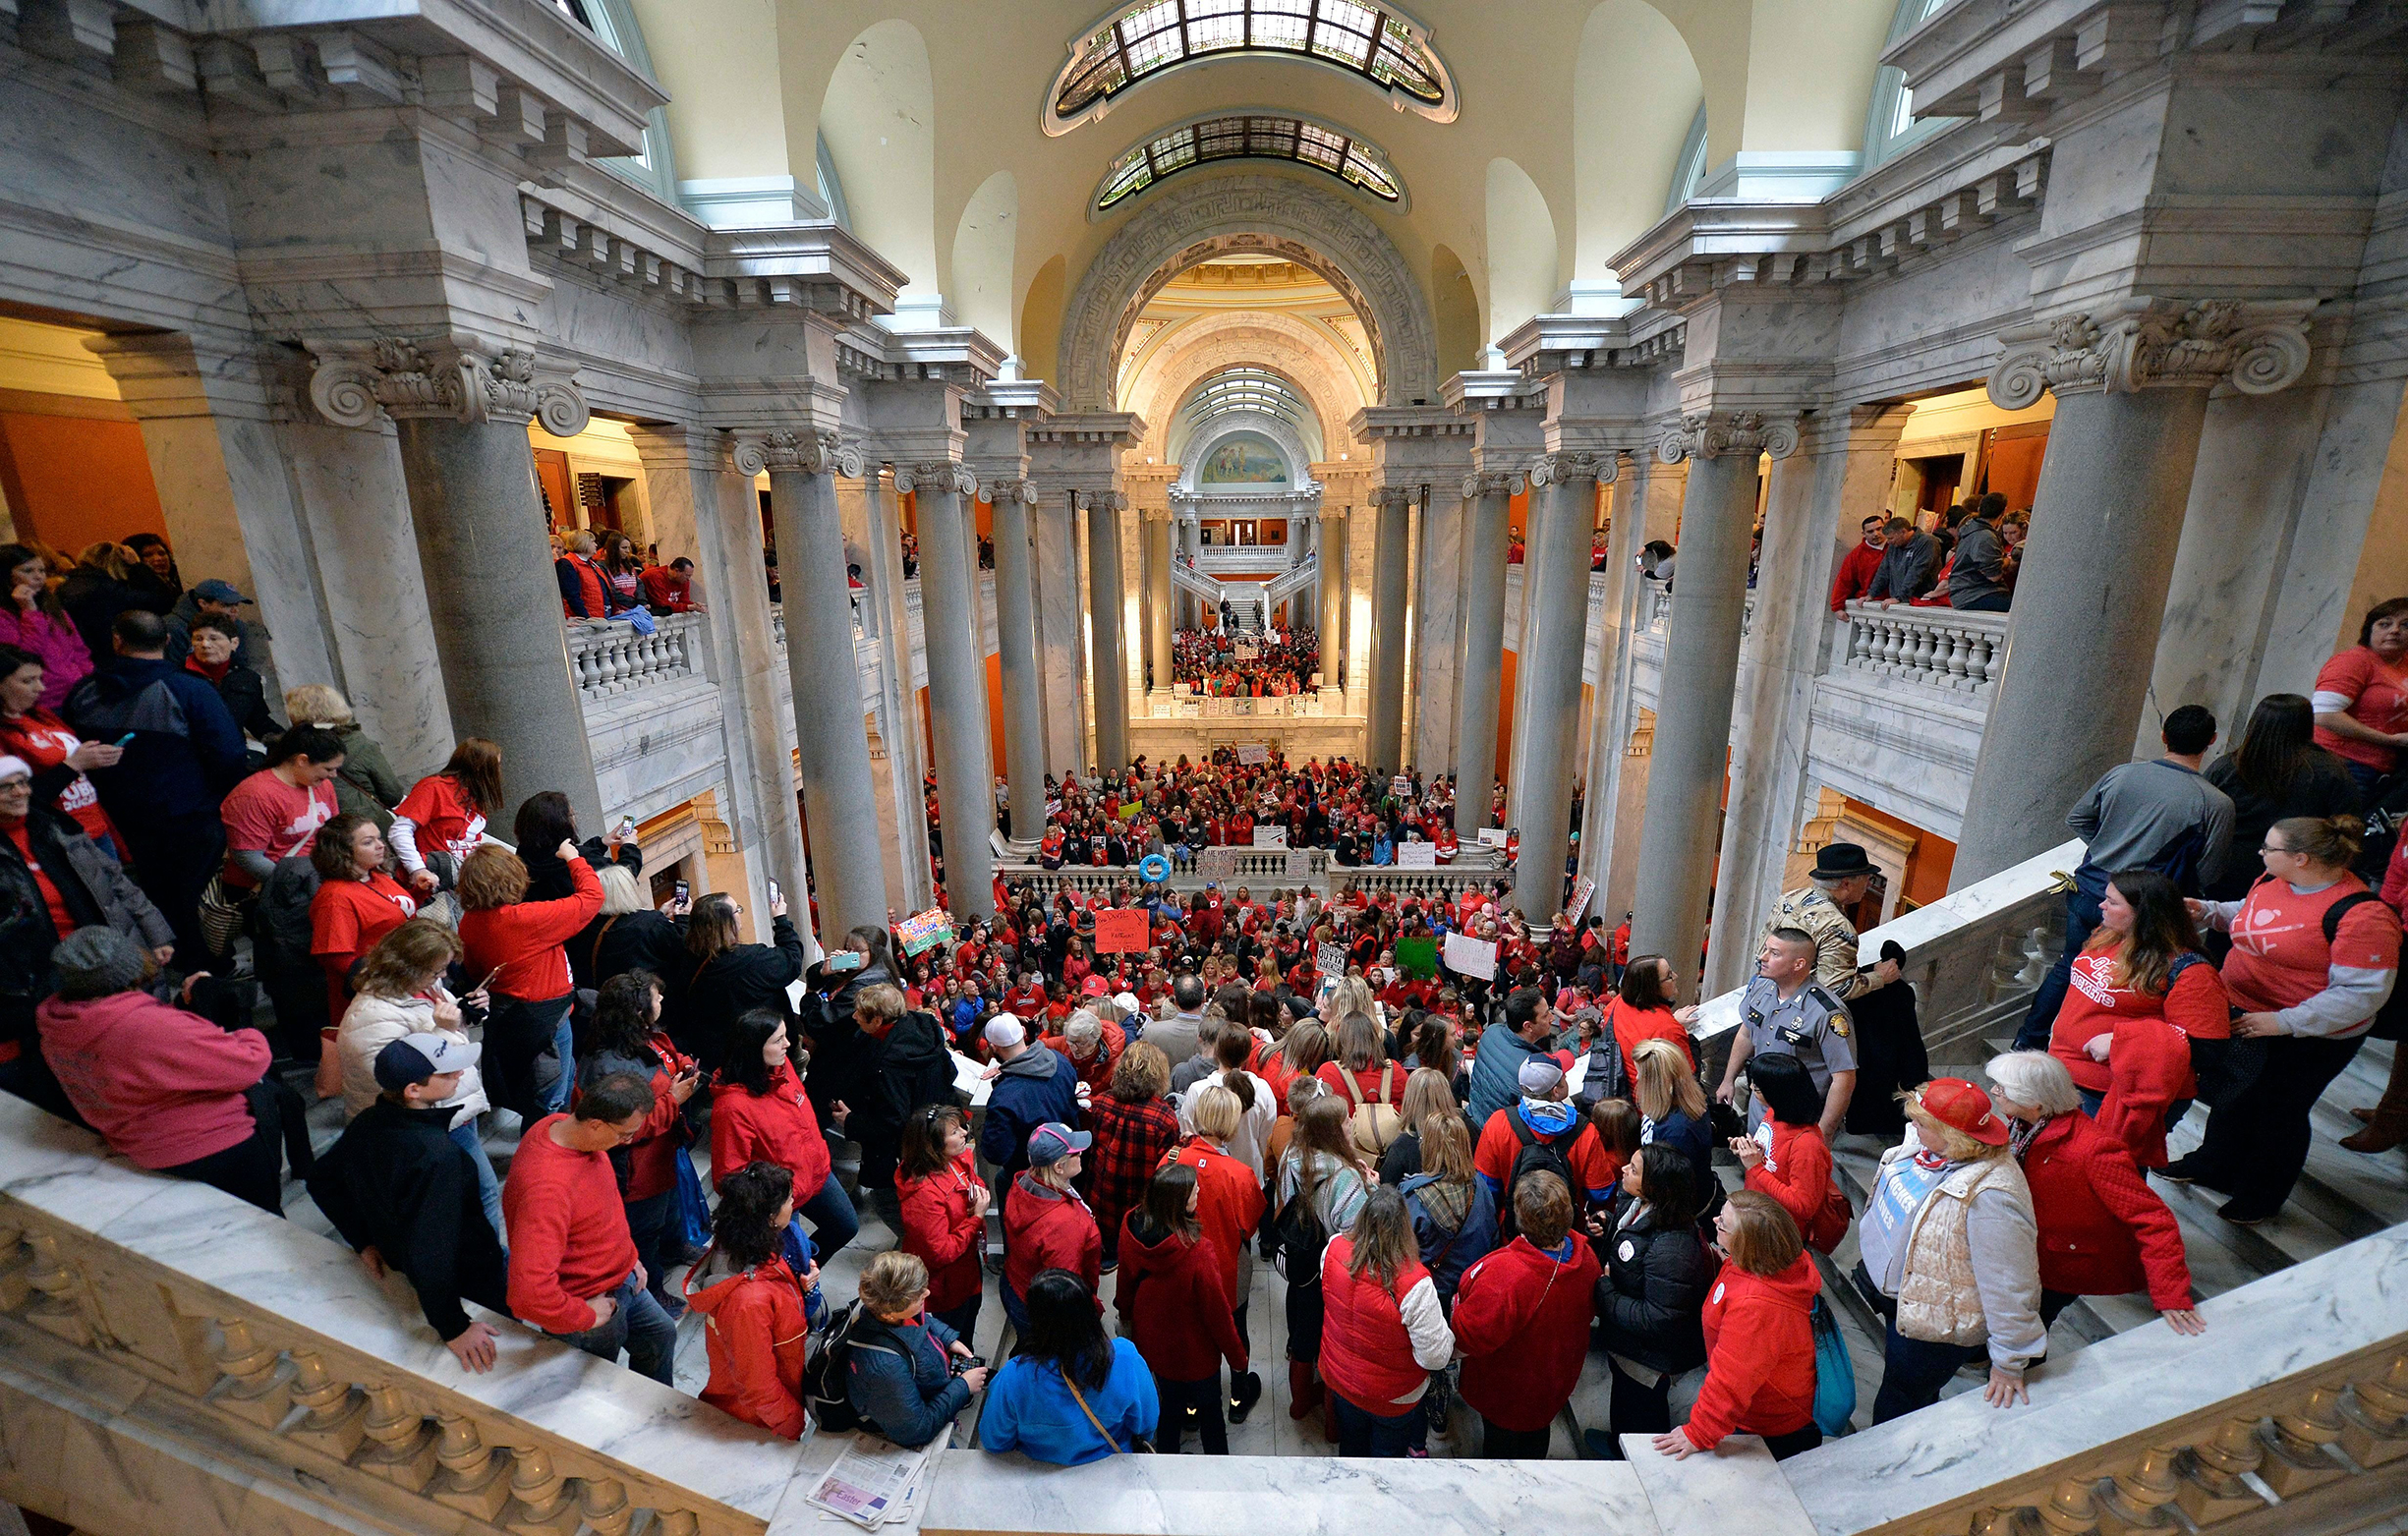 Kentucky teachers fill the state capitol on April 2 to protest pension changes and budget cutThousands of teachers from across Kentucky fill the state Capitol to rally for increased funding and to protest last minute changes to their state funded pension system, in Frankfort, Ky. Thousands filled the state Capitol to protest teacher pension changes, and schools were closed statewide in Oklahoma as thousands more educators rallied for increased education funding
                      Teacher Protests, Frankfort, USA - 02 Apr 2018 (Timothy D. Easley—AP/Shutterstock)